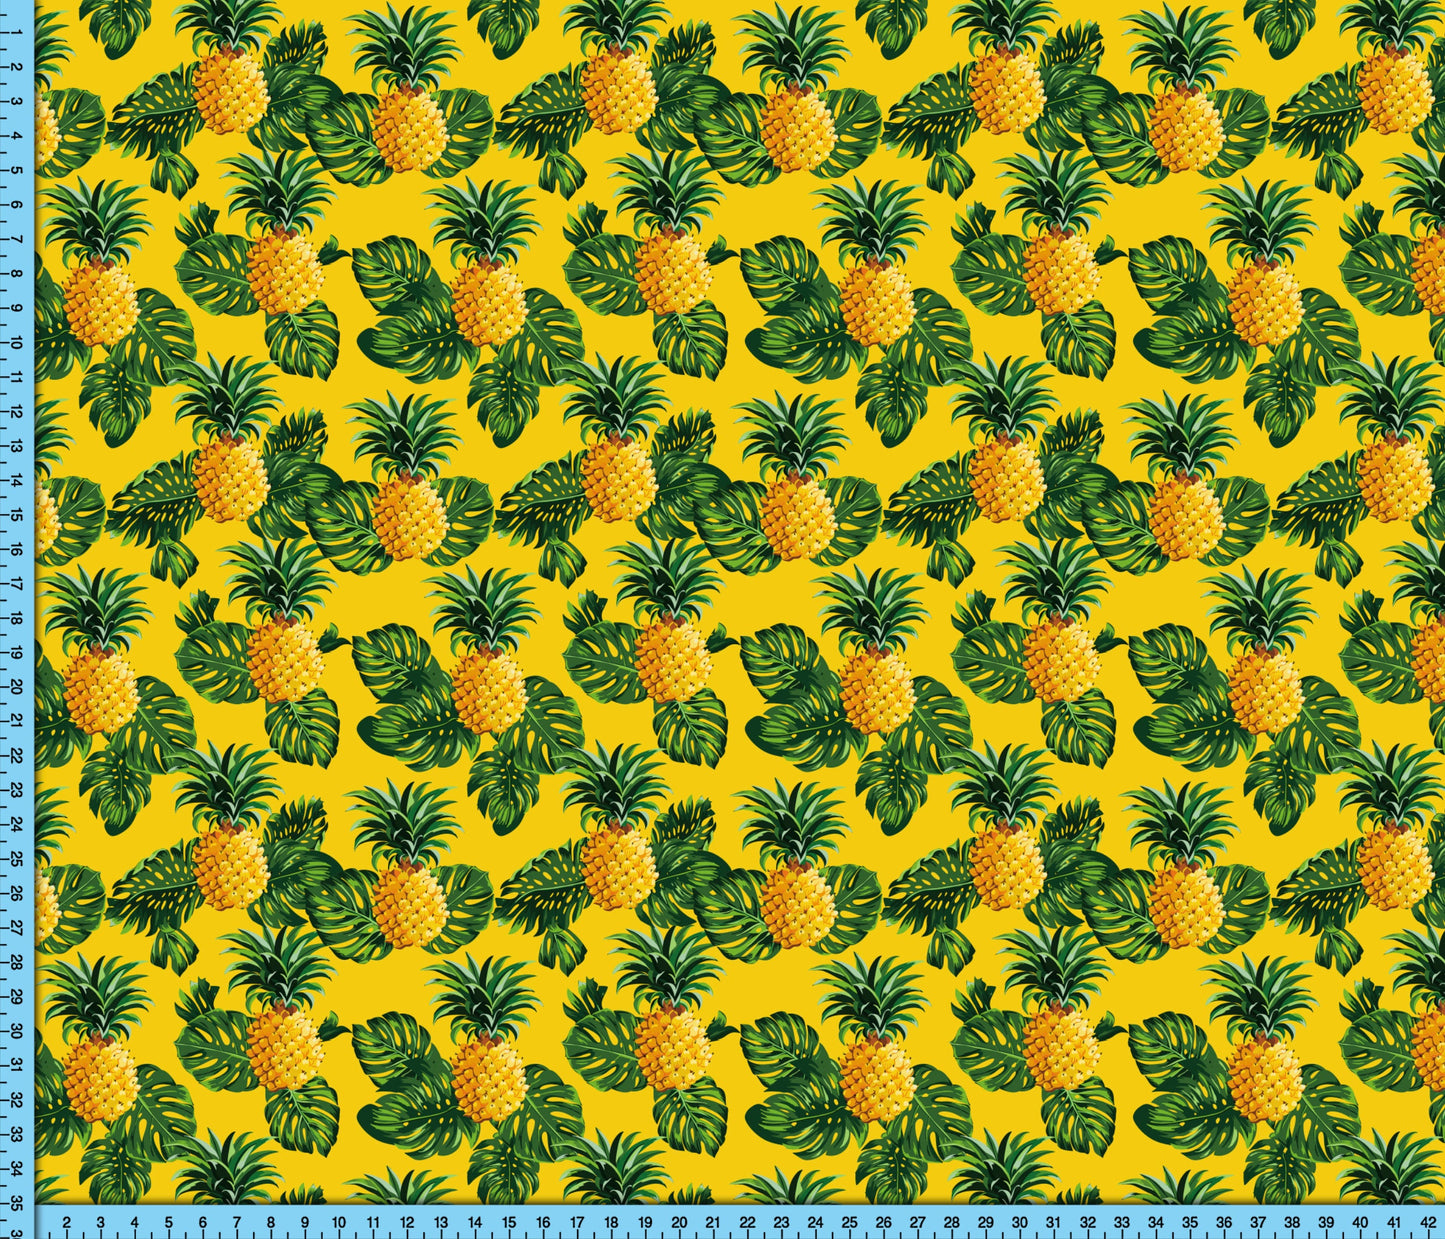 Tropical Pineapples Fabric Pattern Printed By the Yard